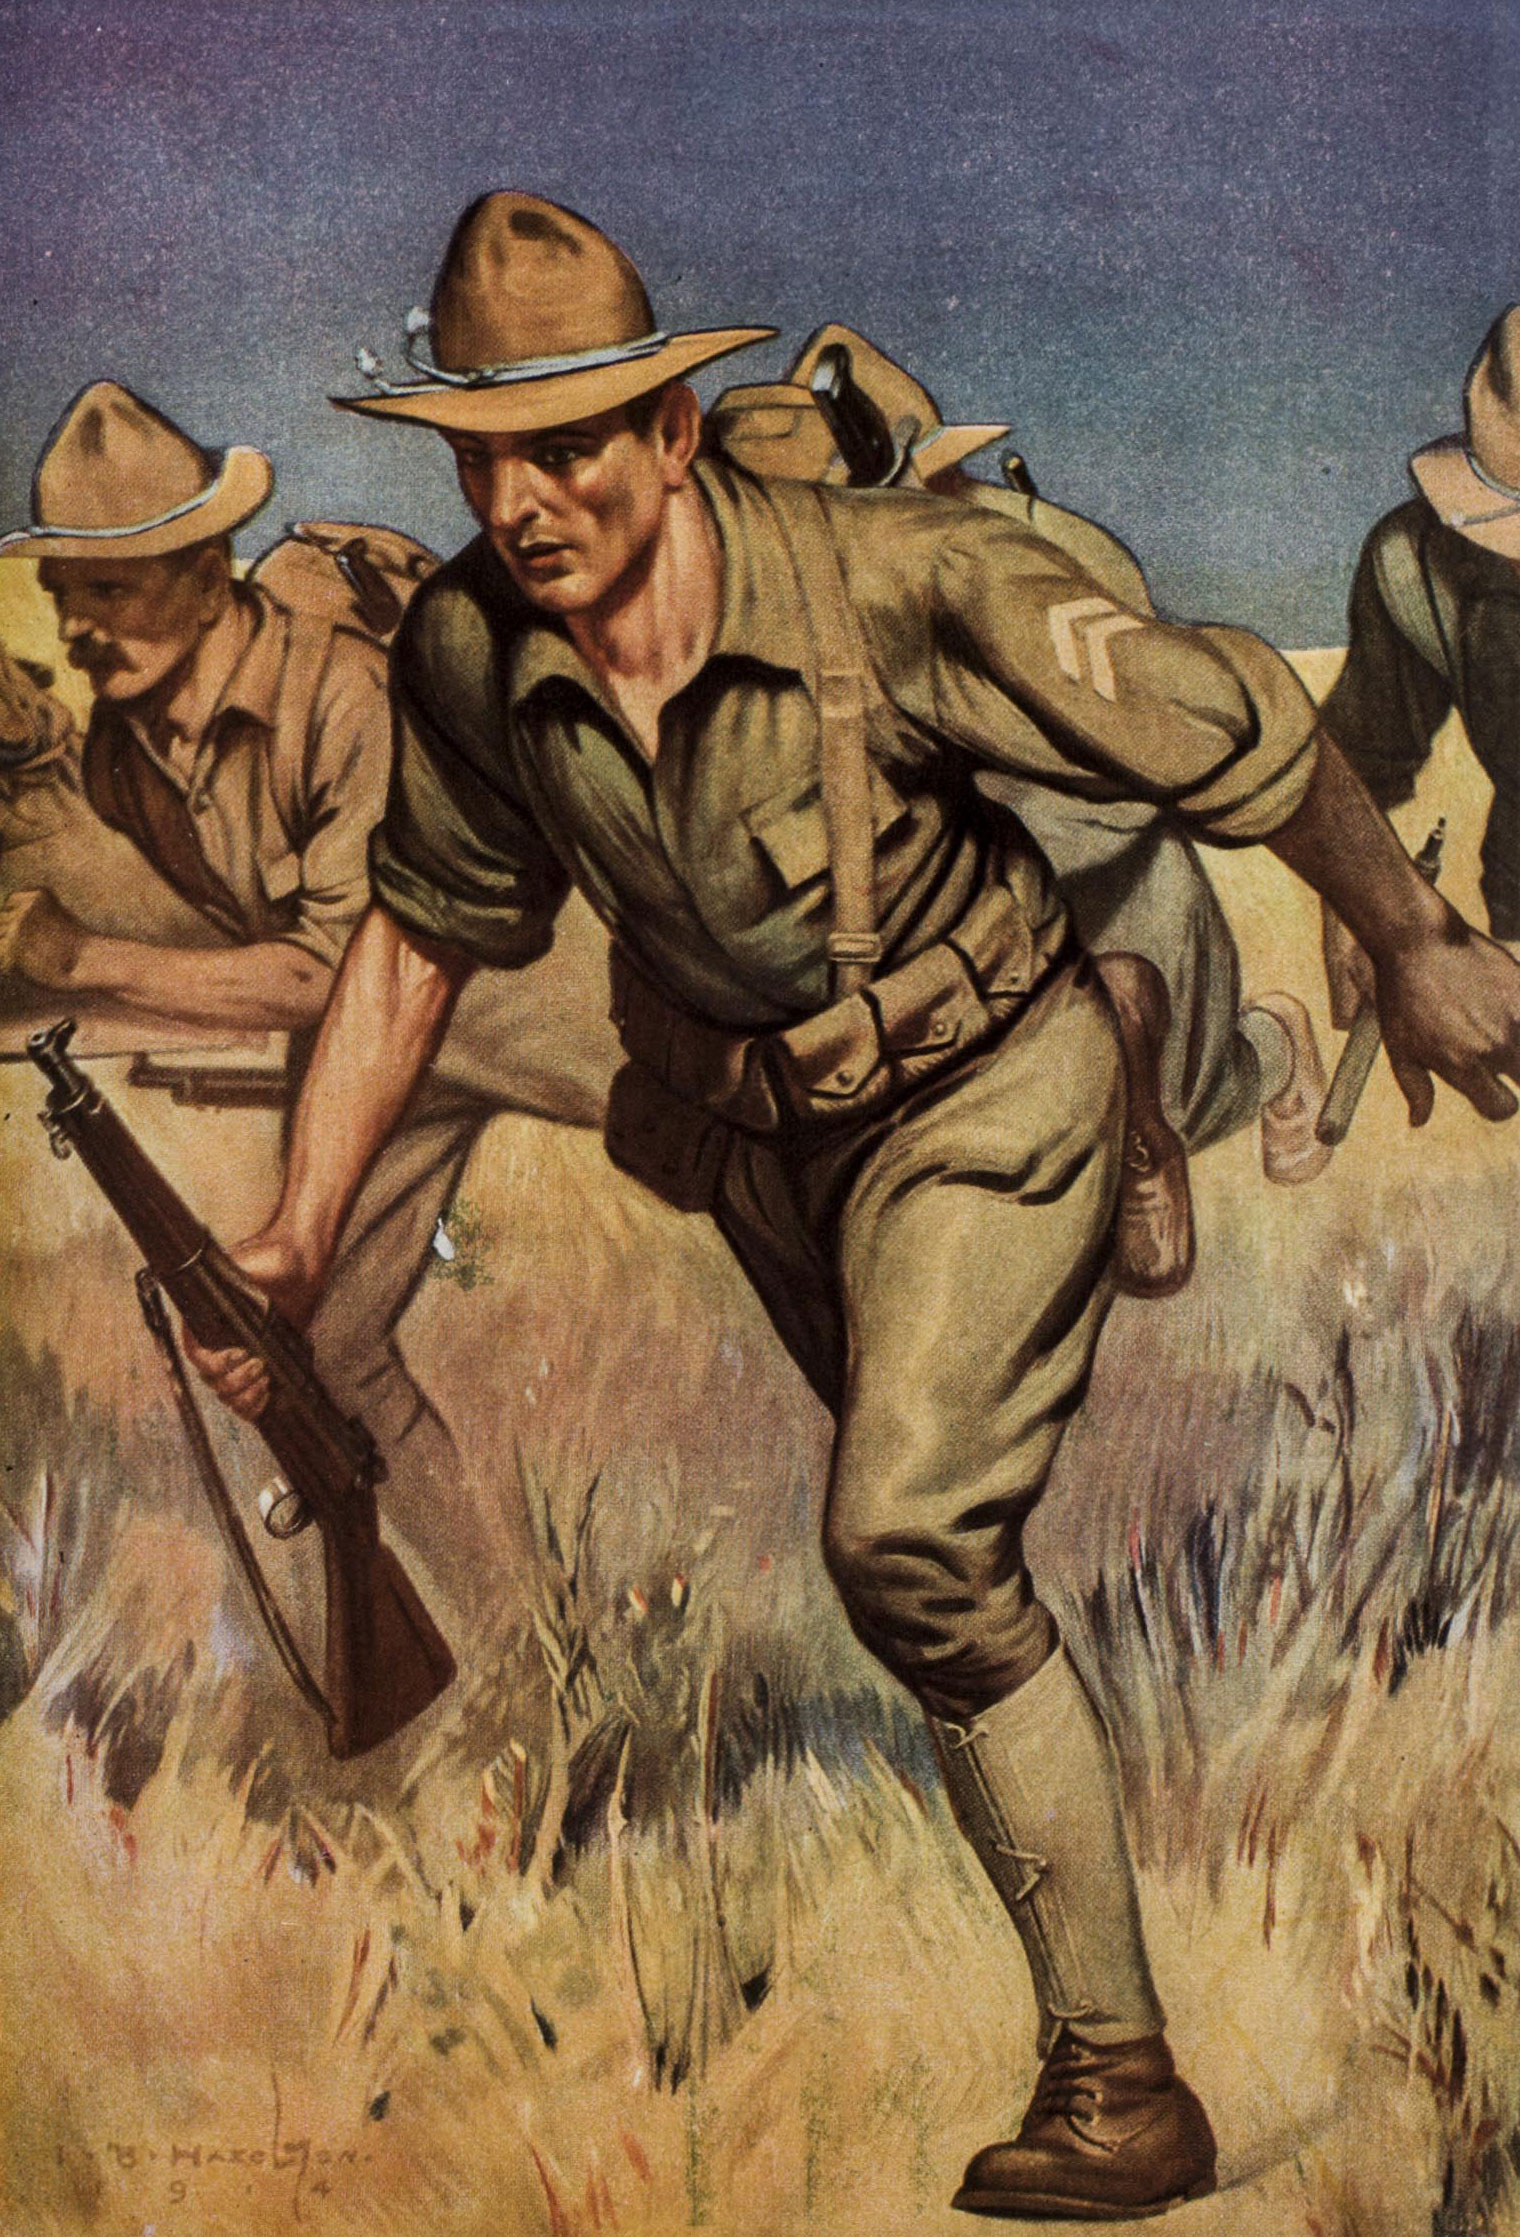 Reproduction of a conscription poster for the US Army